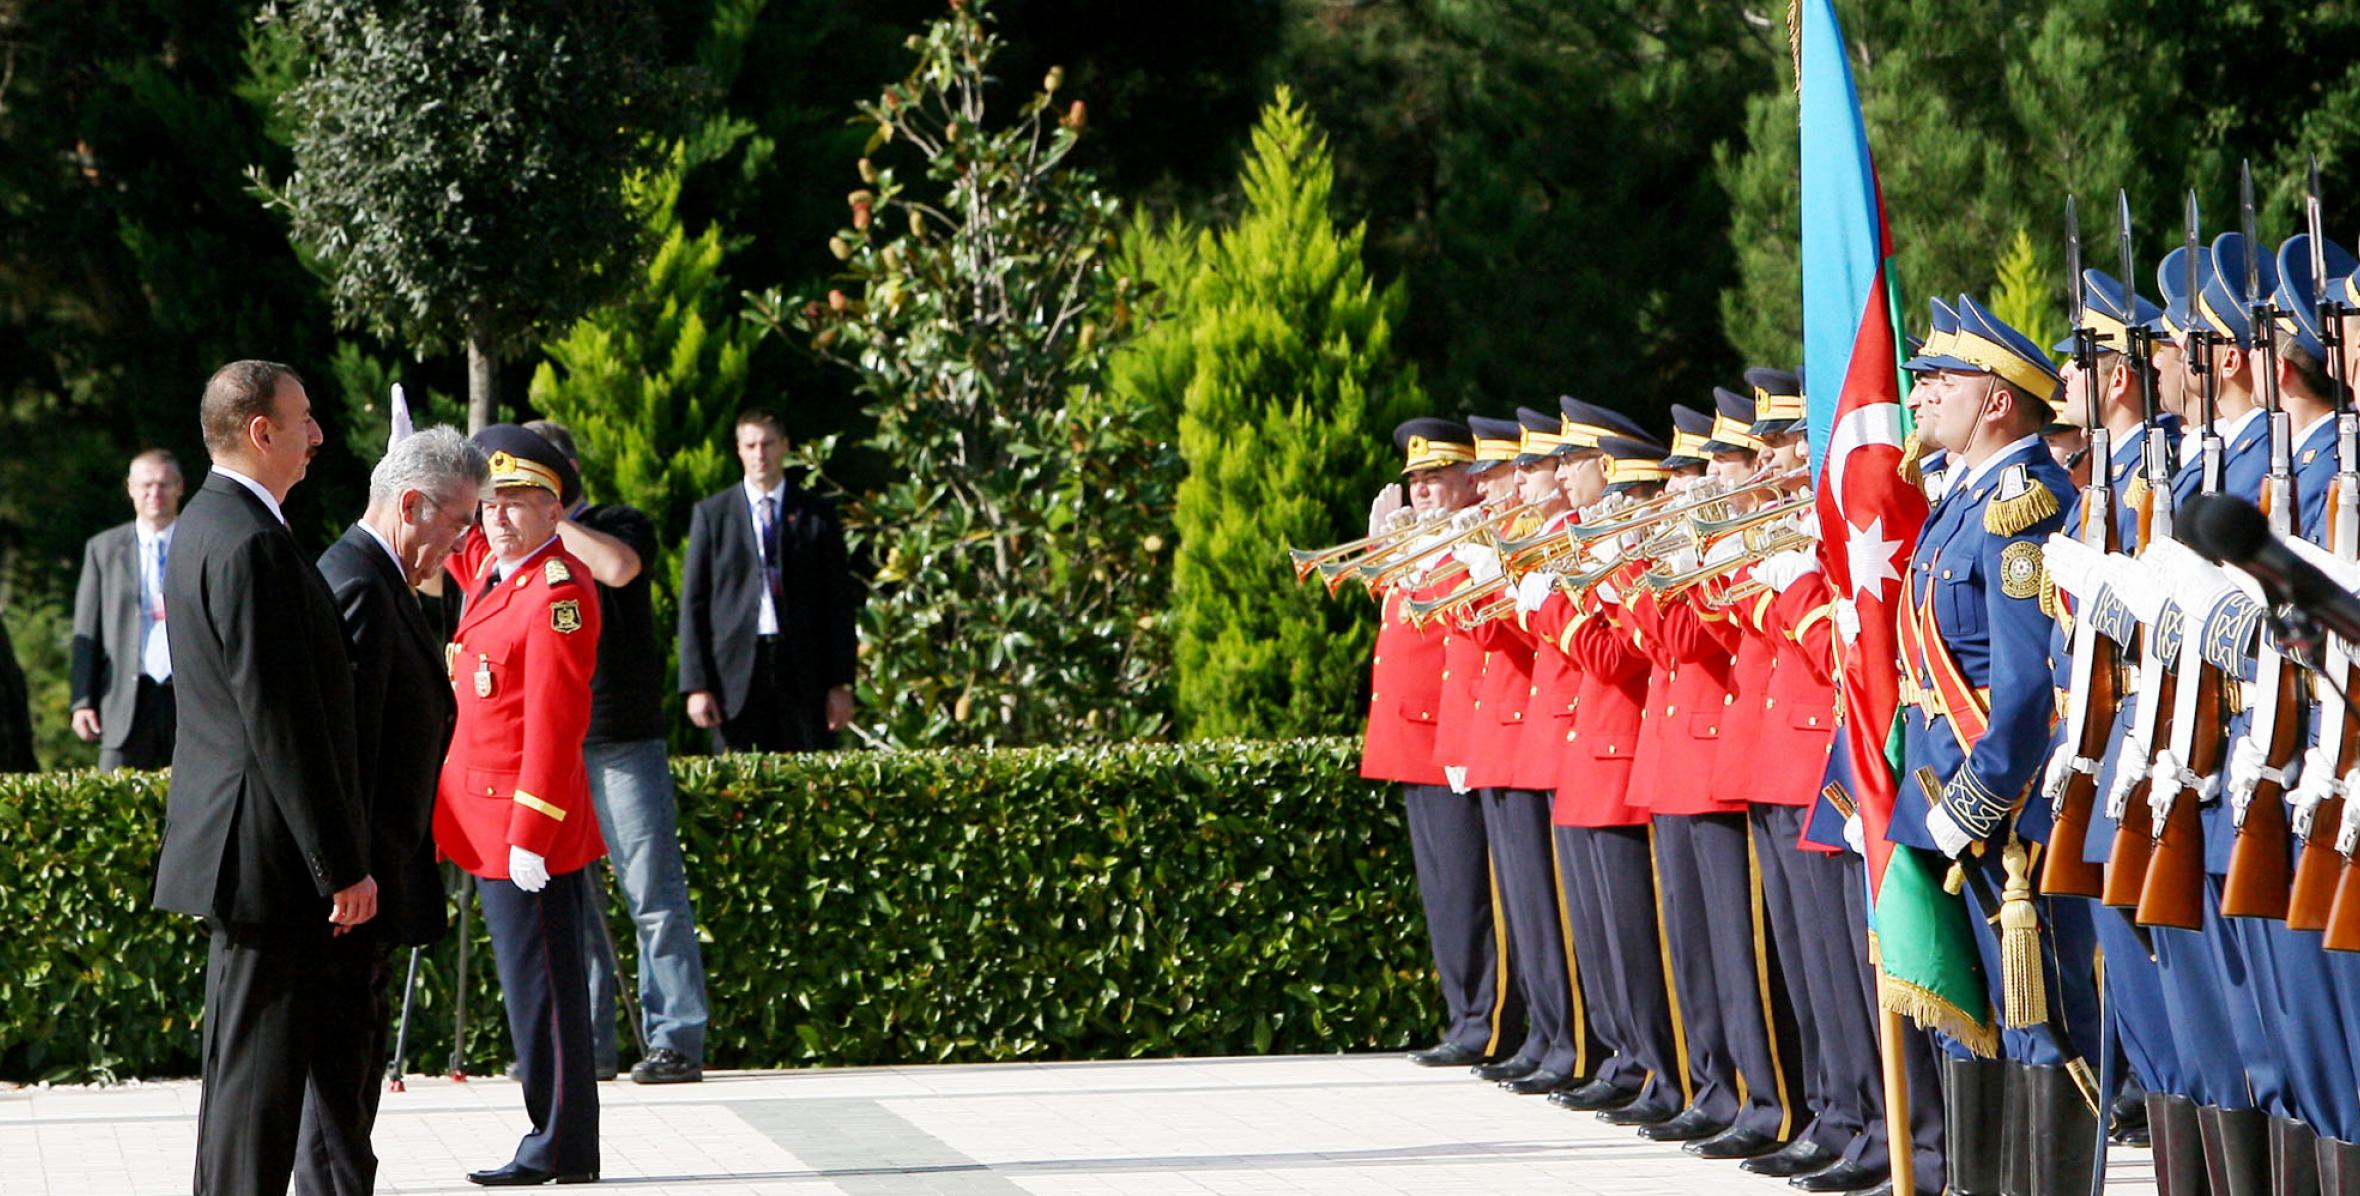 Official welcoming ceremony of Federal President of the Republic of Austria Heinz Fischer was held